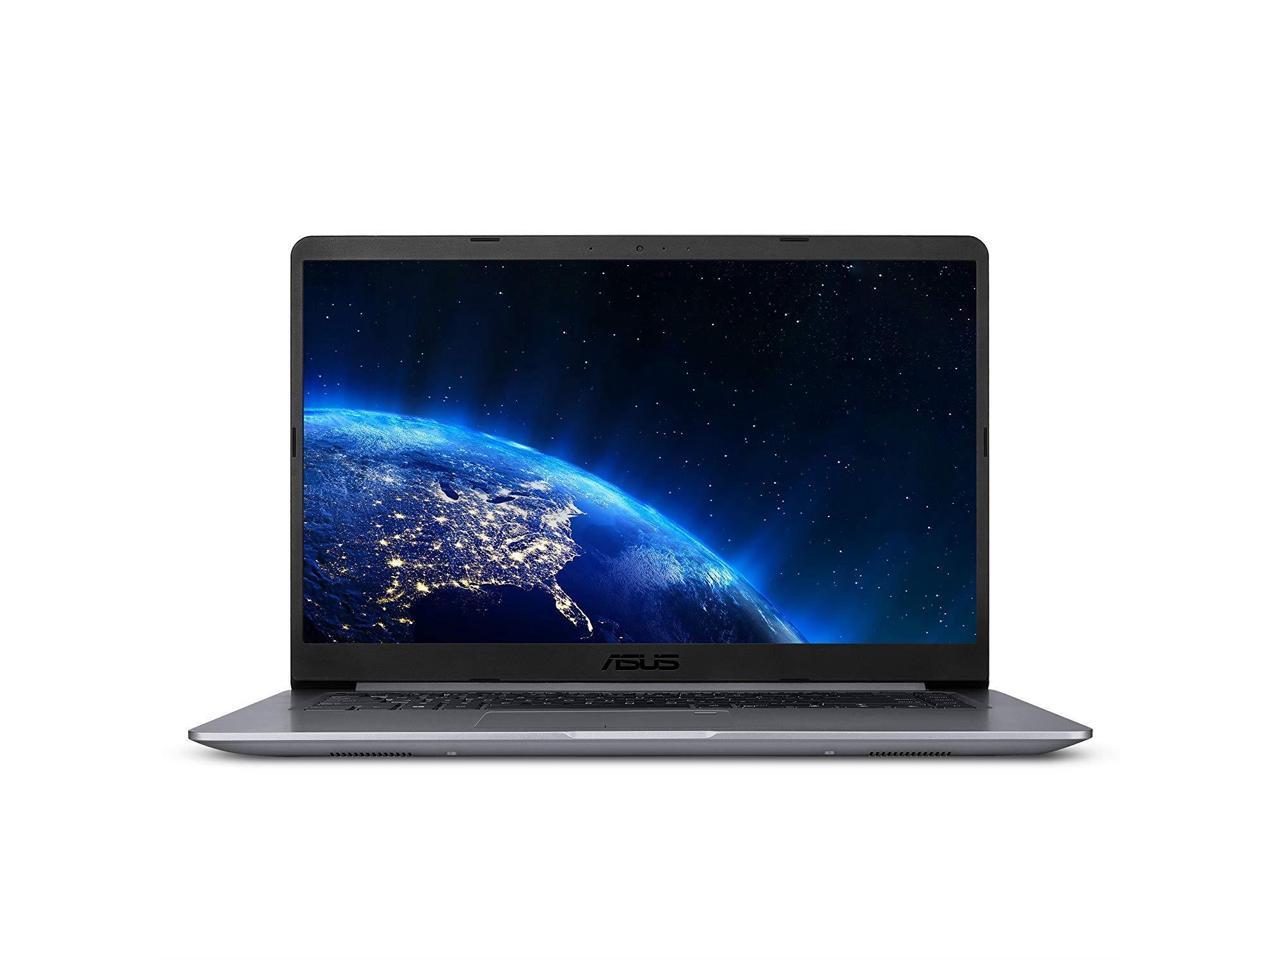 Newest Asus VivoBook Thin & Lightweight Laptop (8G DDR4/256G SSD+1TB HDD)|15.6" Full HD(1920x1080) WideView display| AMD Quad Core A12-9720P Processor| Wi-Fi |Fingerprint Reader|Windows 10 in S Mode